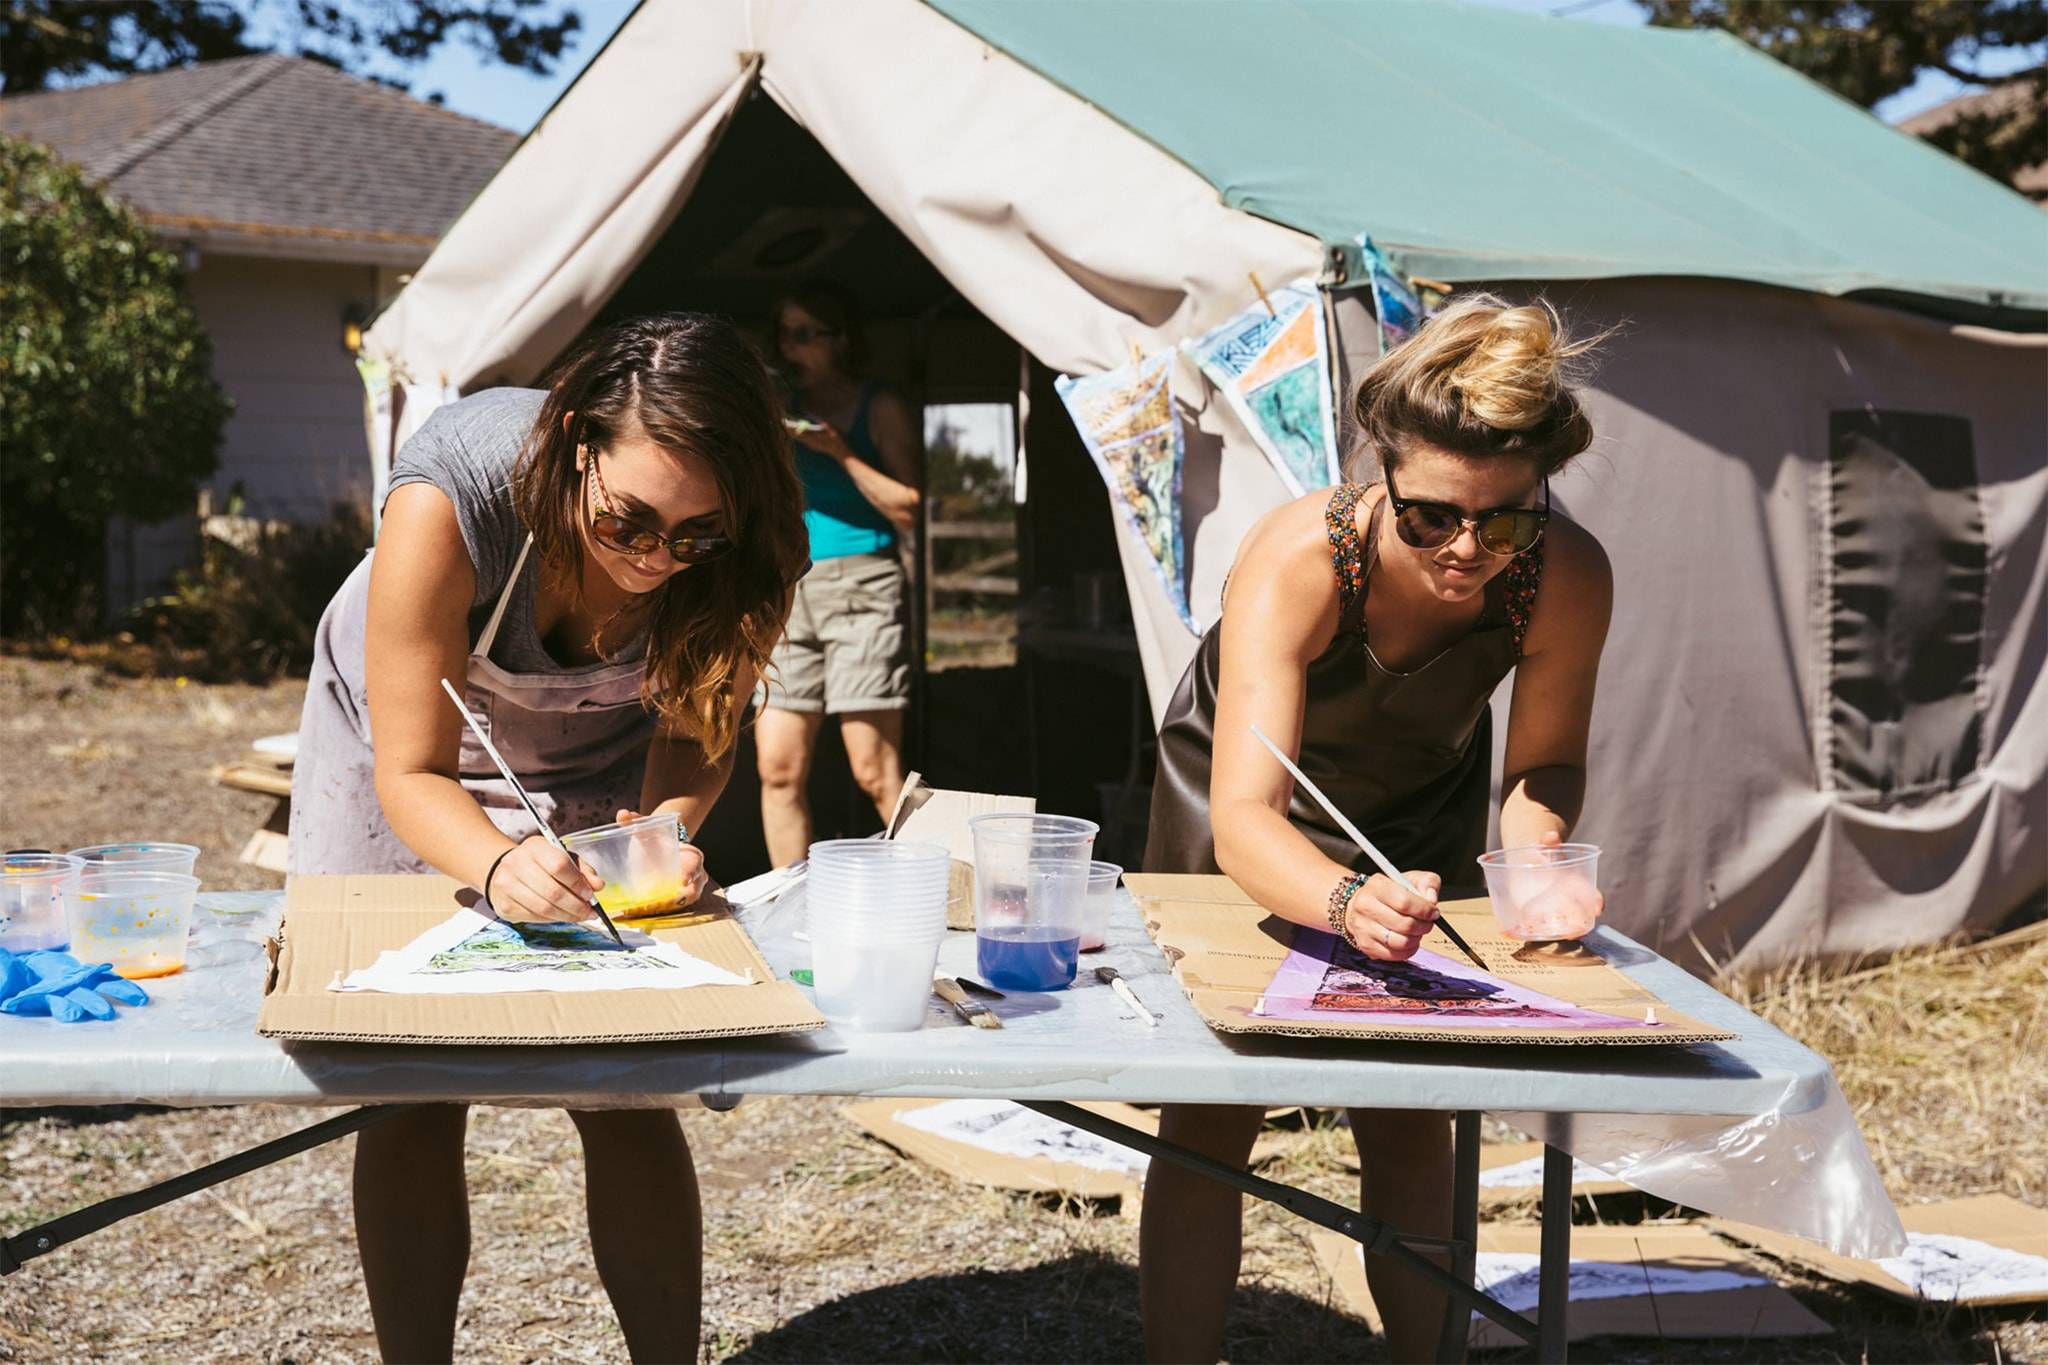 Two women painting on a box outside their tent